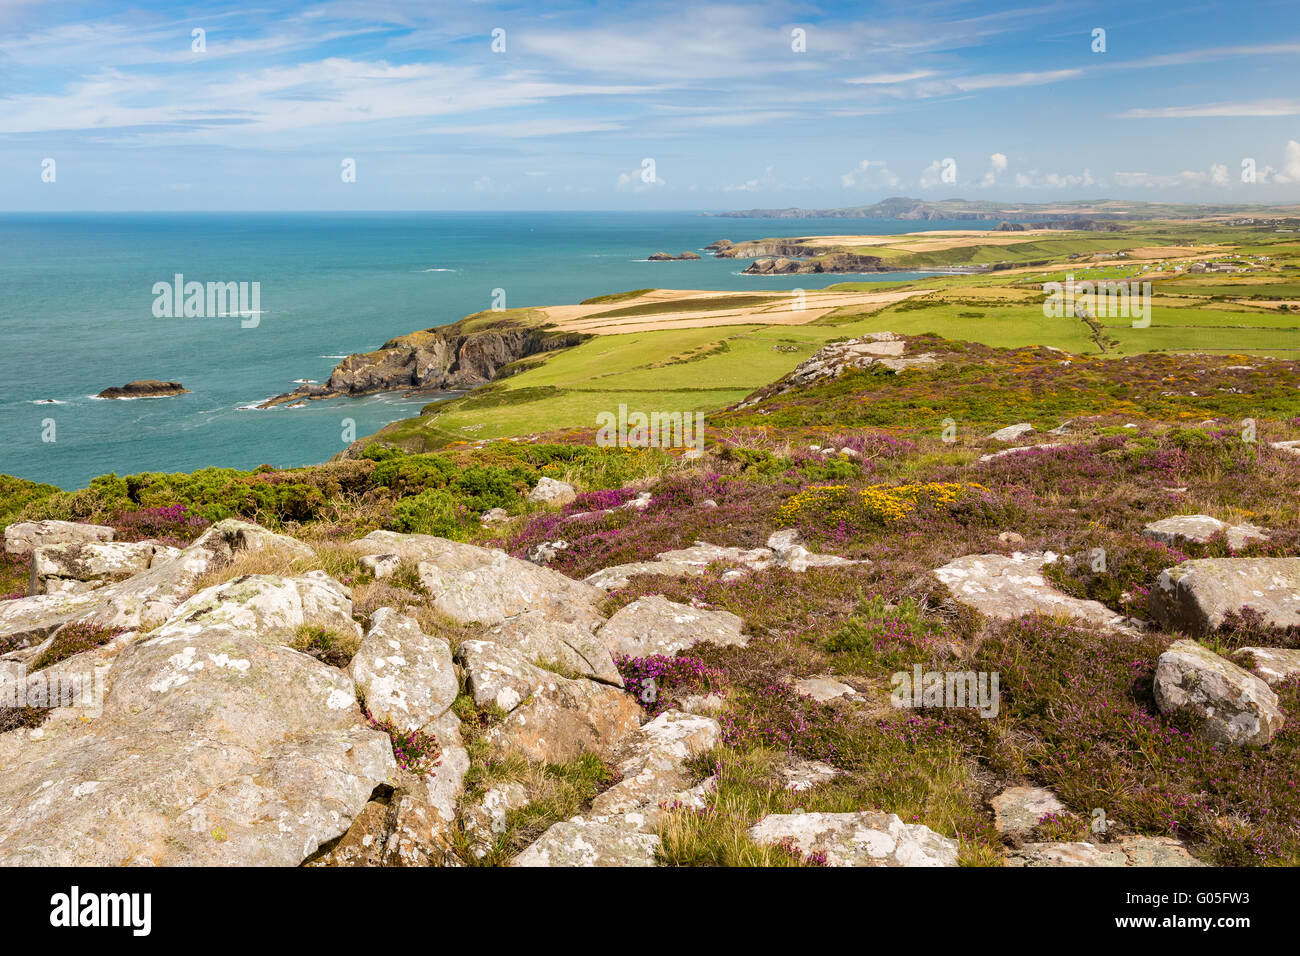 The north Pembrokeshire coastline from Penberry mountain with wild flowers and heather - Pembrokeshire Stock Photo